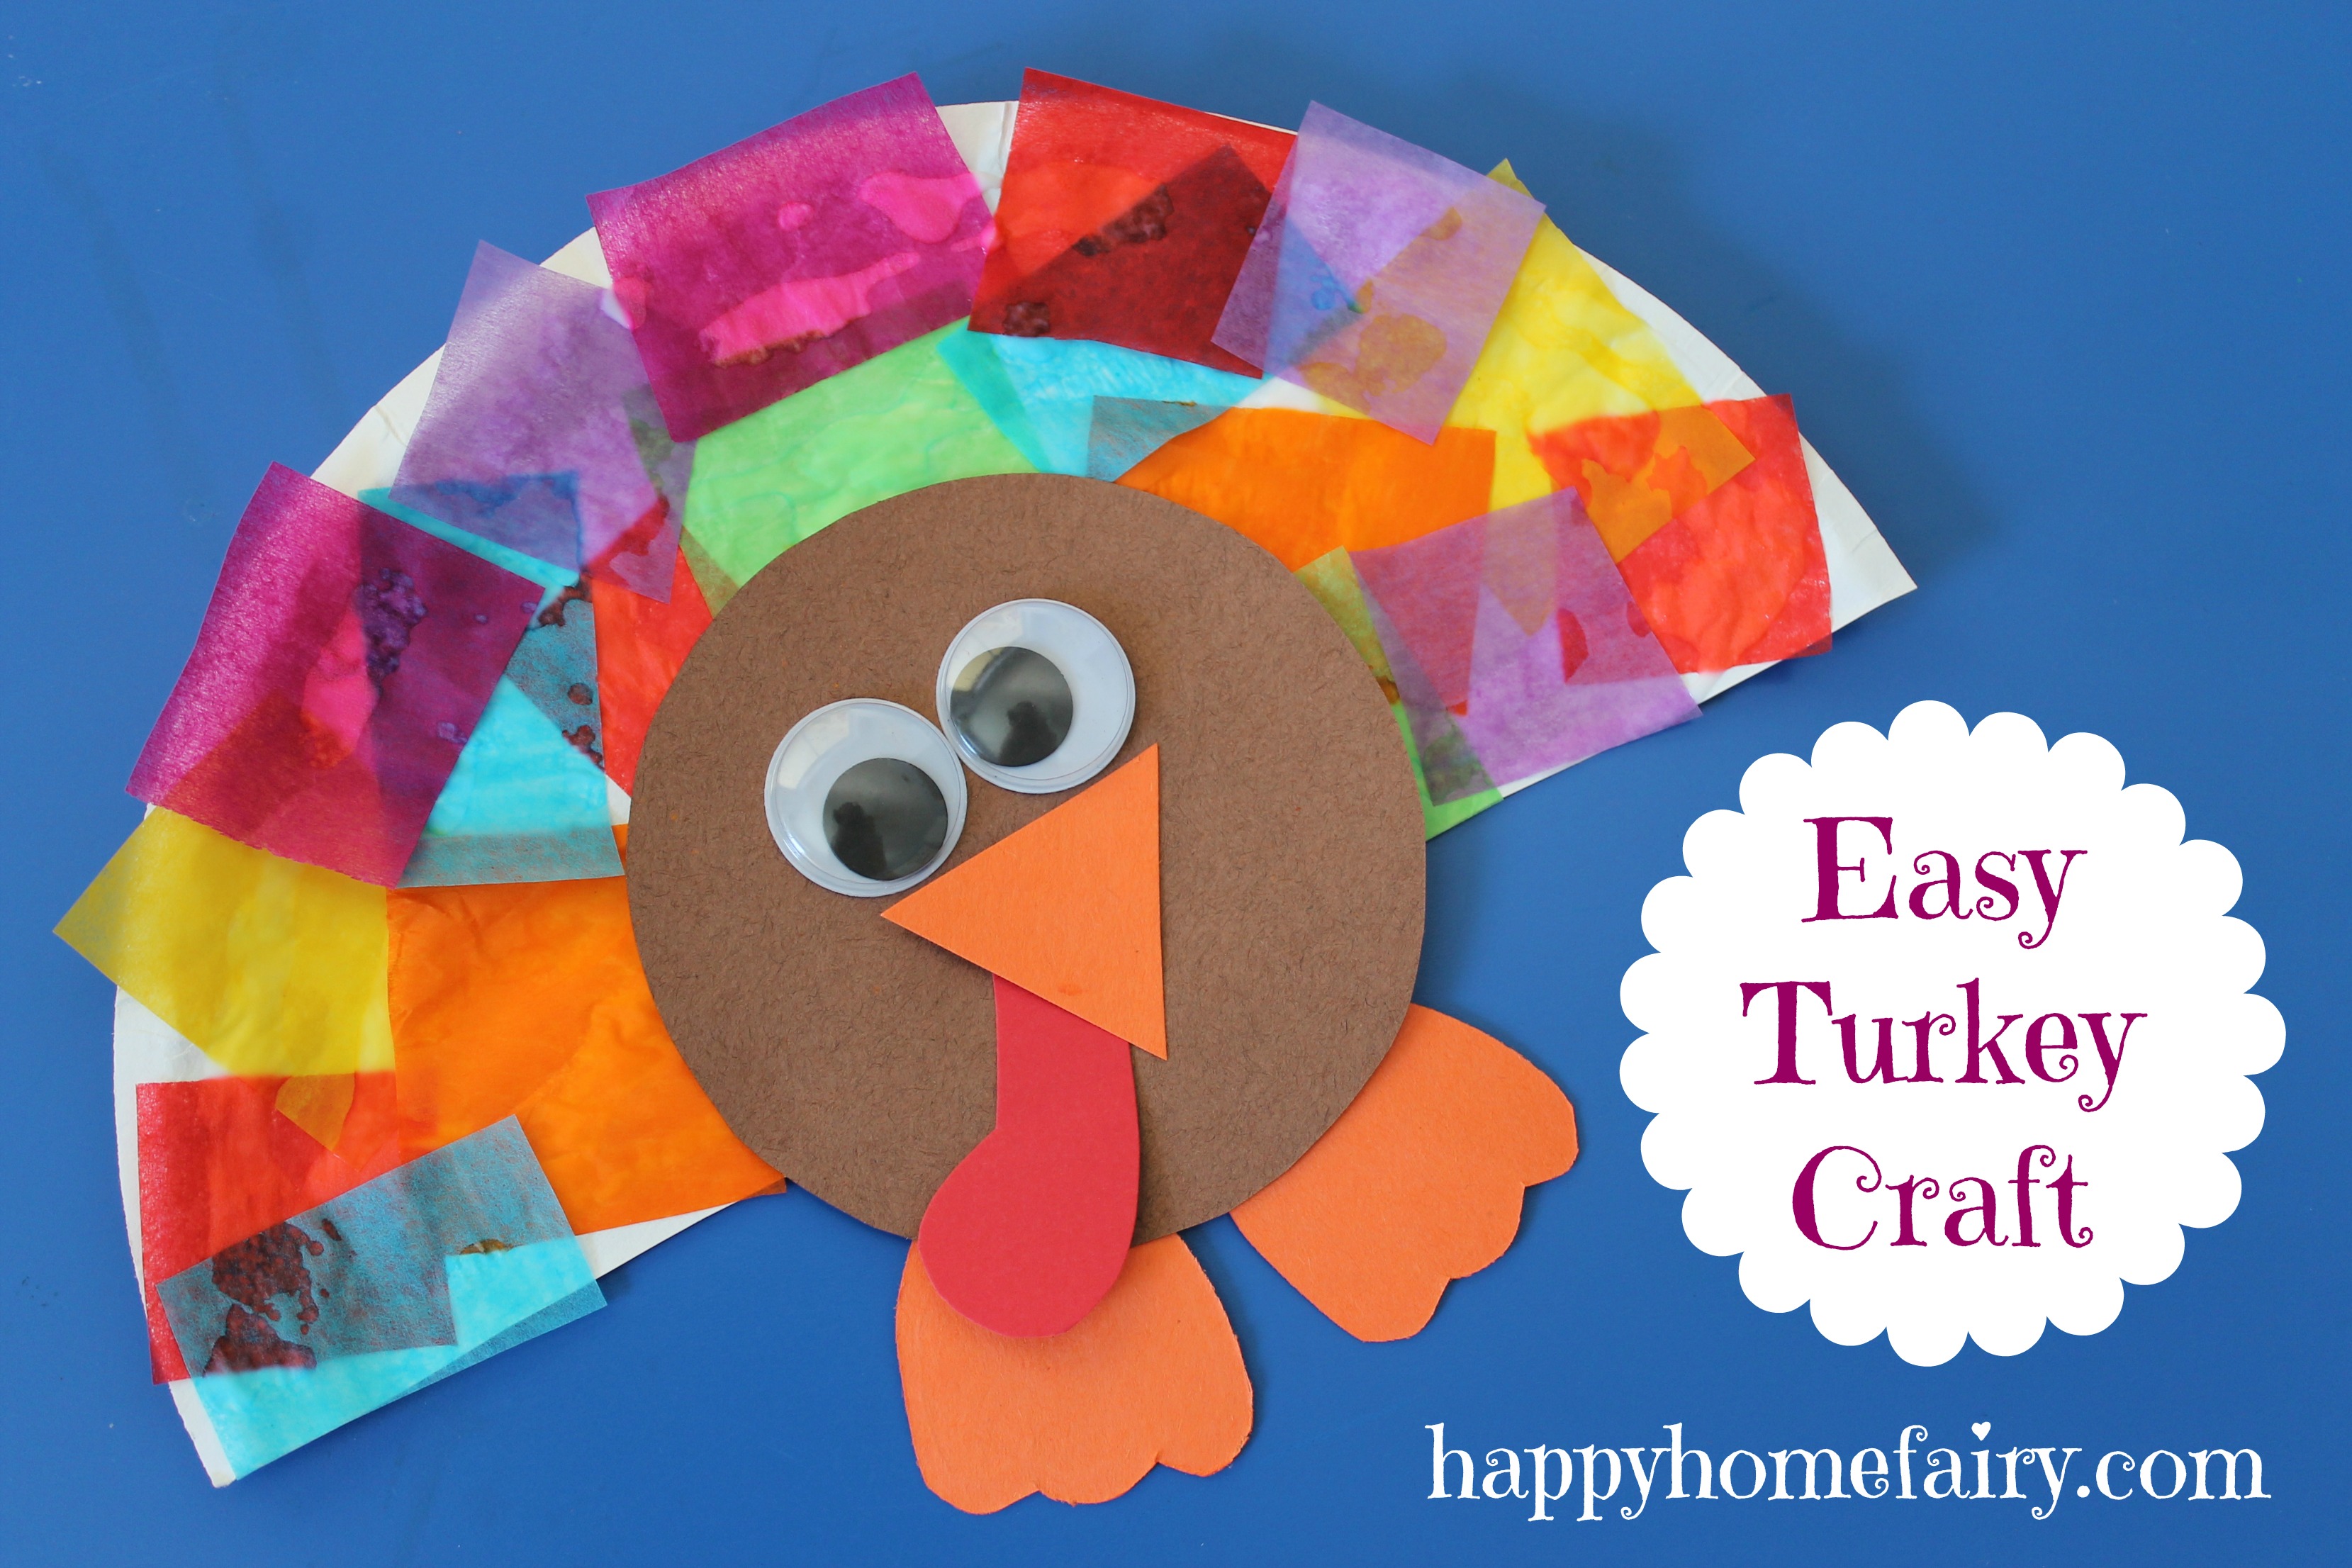 Make hand-print turkeys from colored paper - Projects for Preschoolers